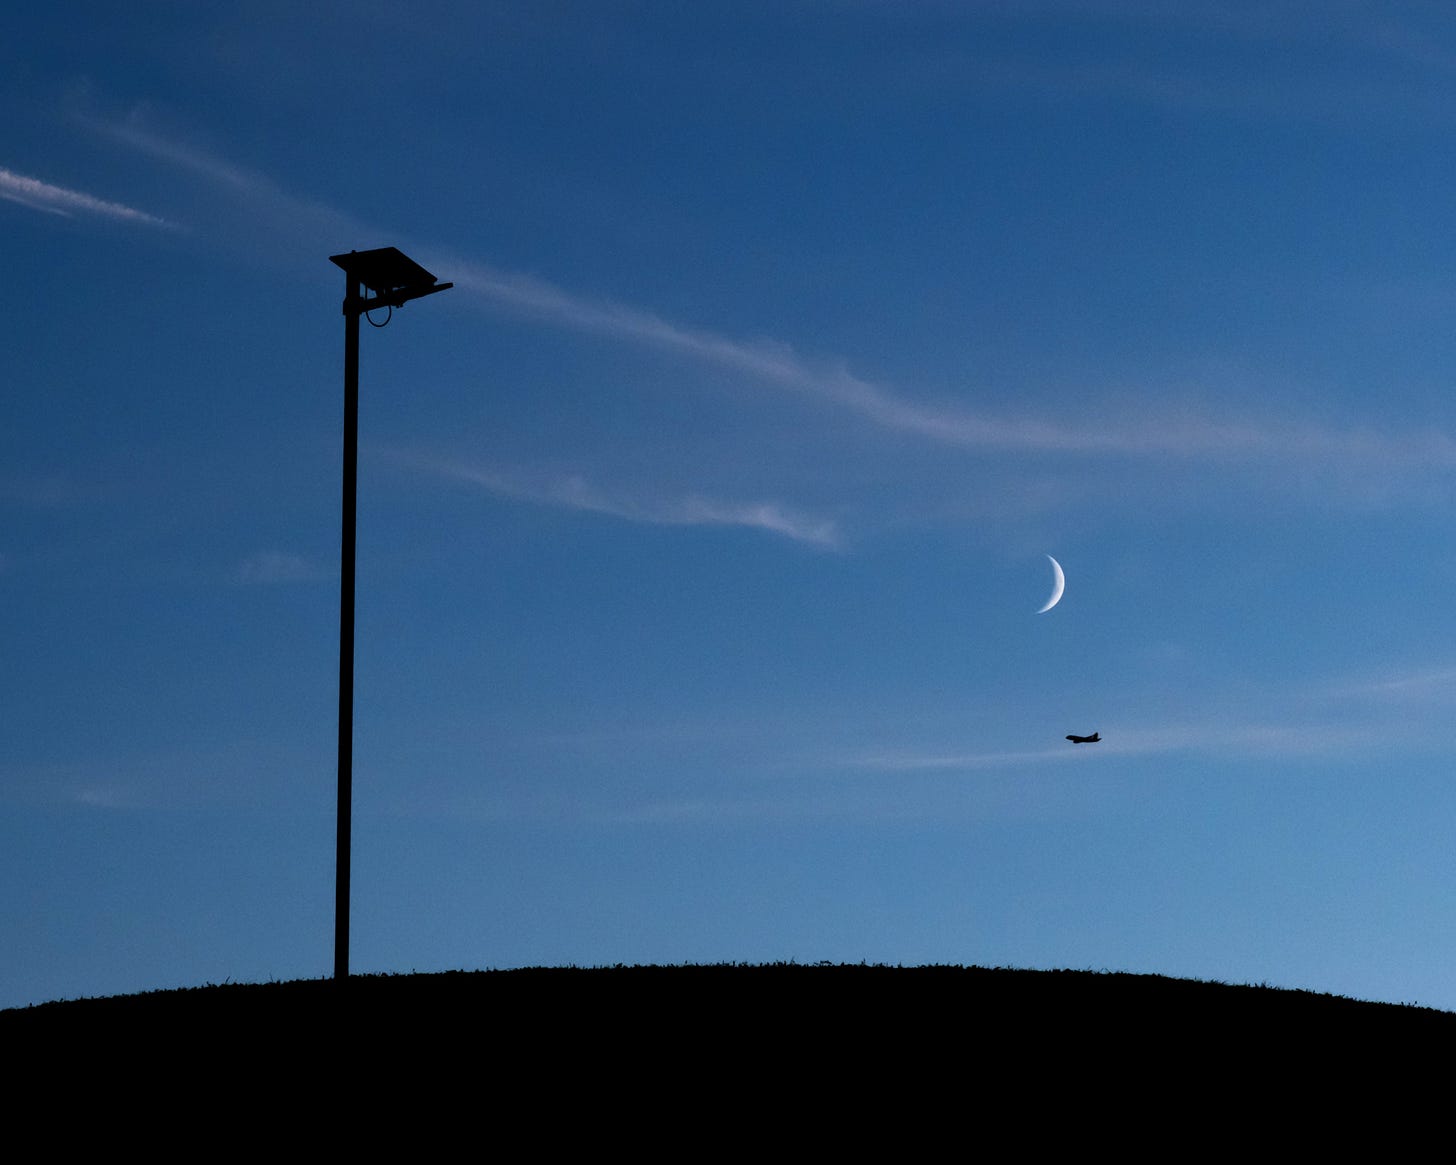 A plane flies under a crescent moon in the distance. The photograph is taken from a hill shown in silhouette. A light post at the top of the hill provides a sense of scale to the scene.